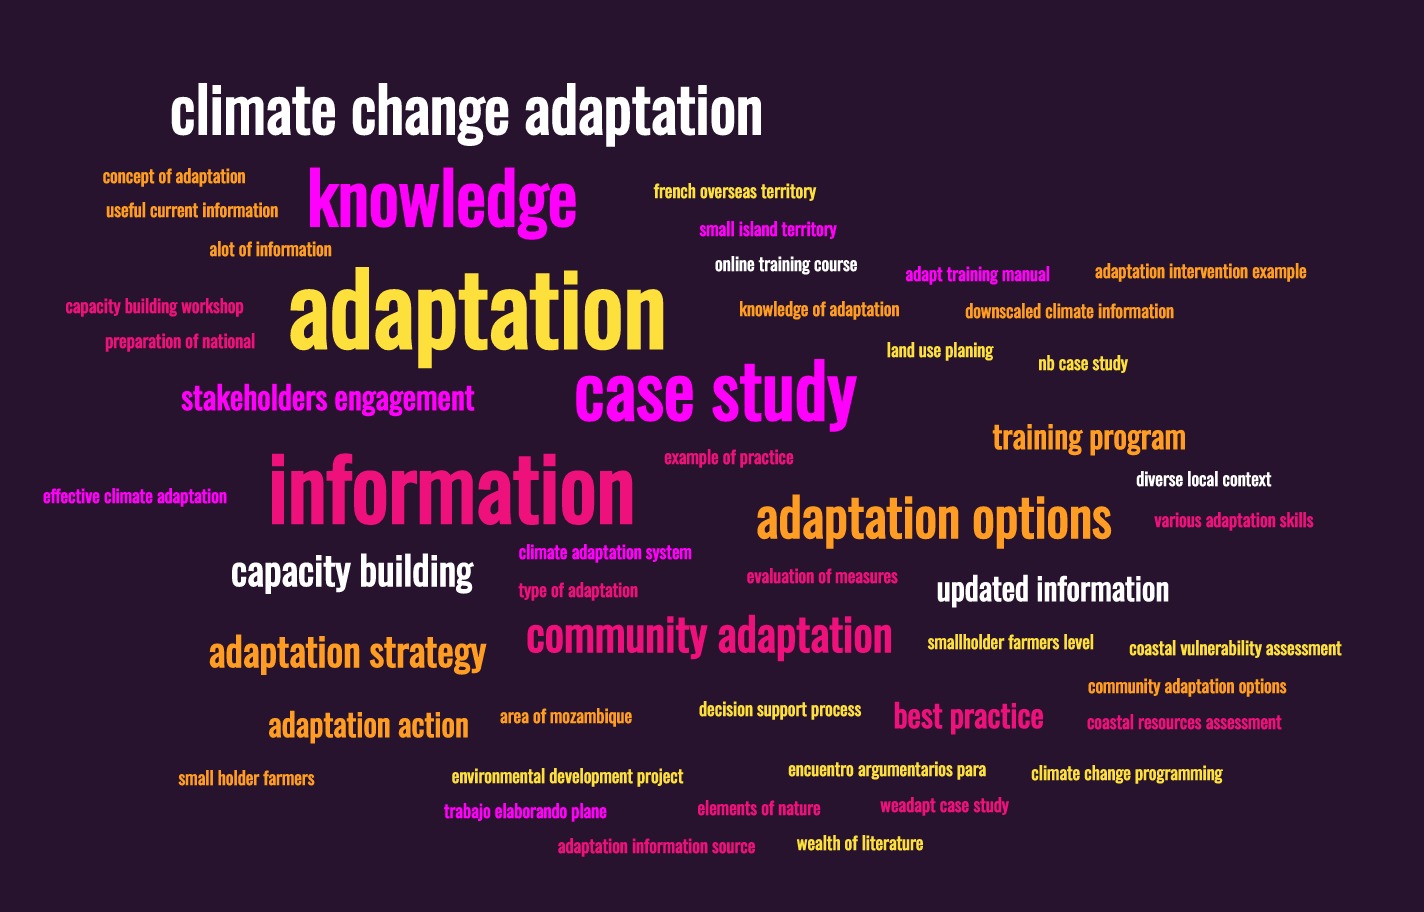 How weADAPT supports adaptation work.